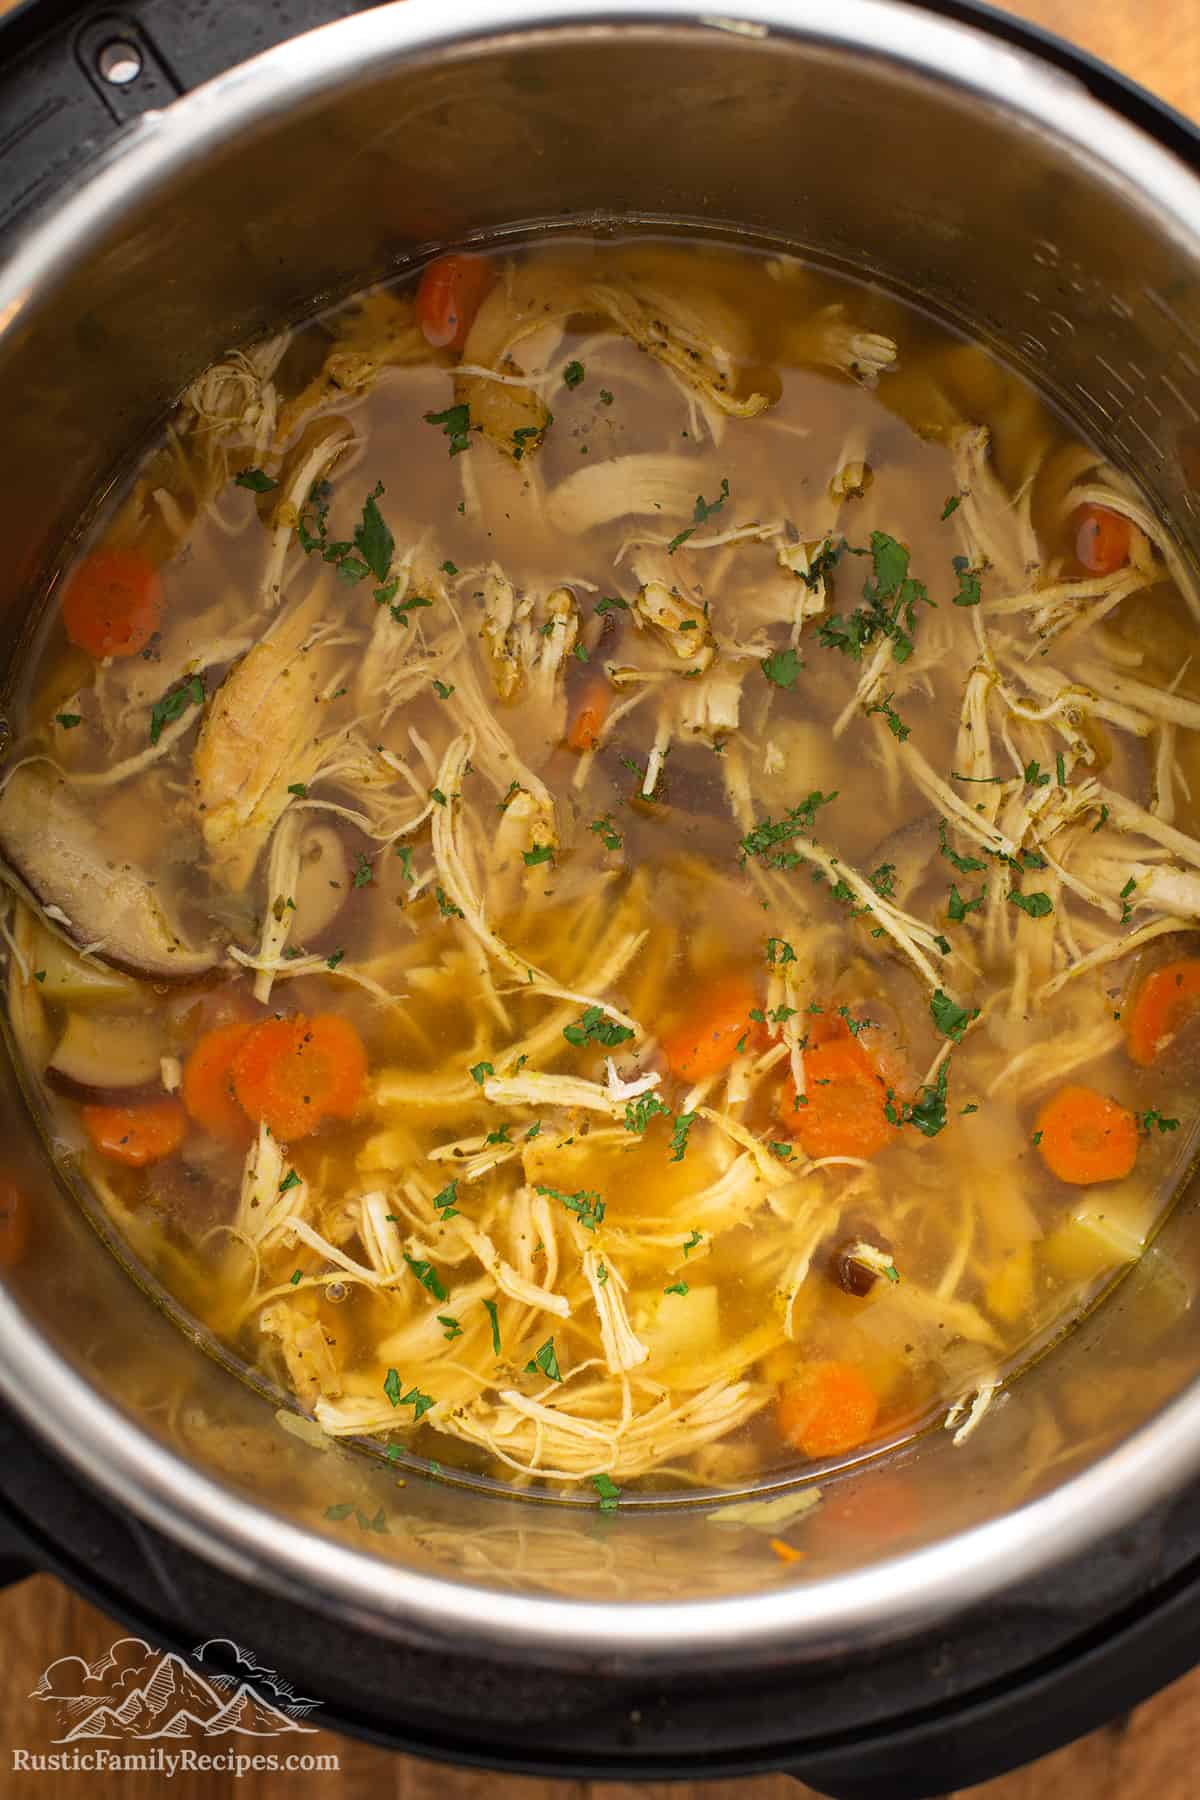 An instant pot bowl with cooked chicken soup